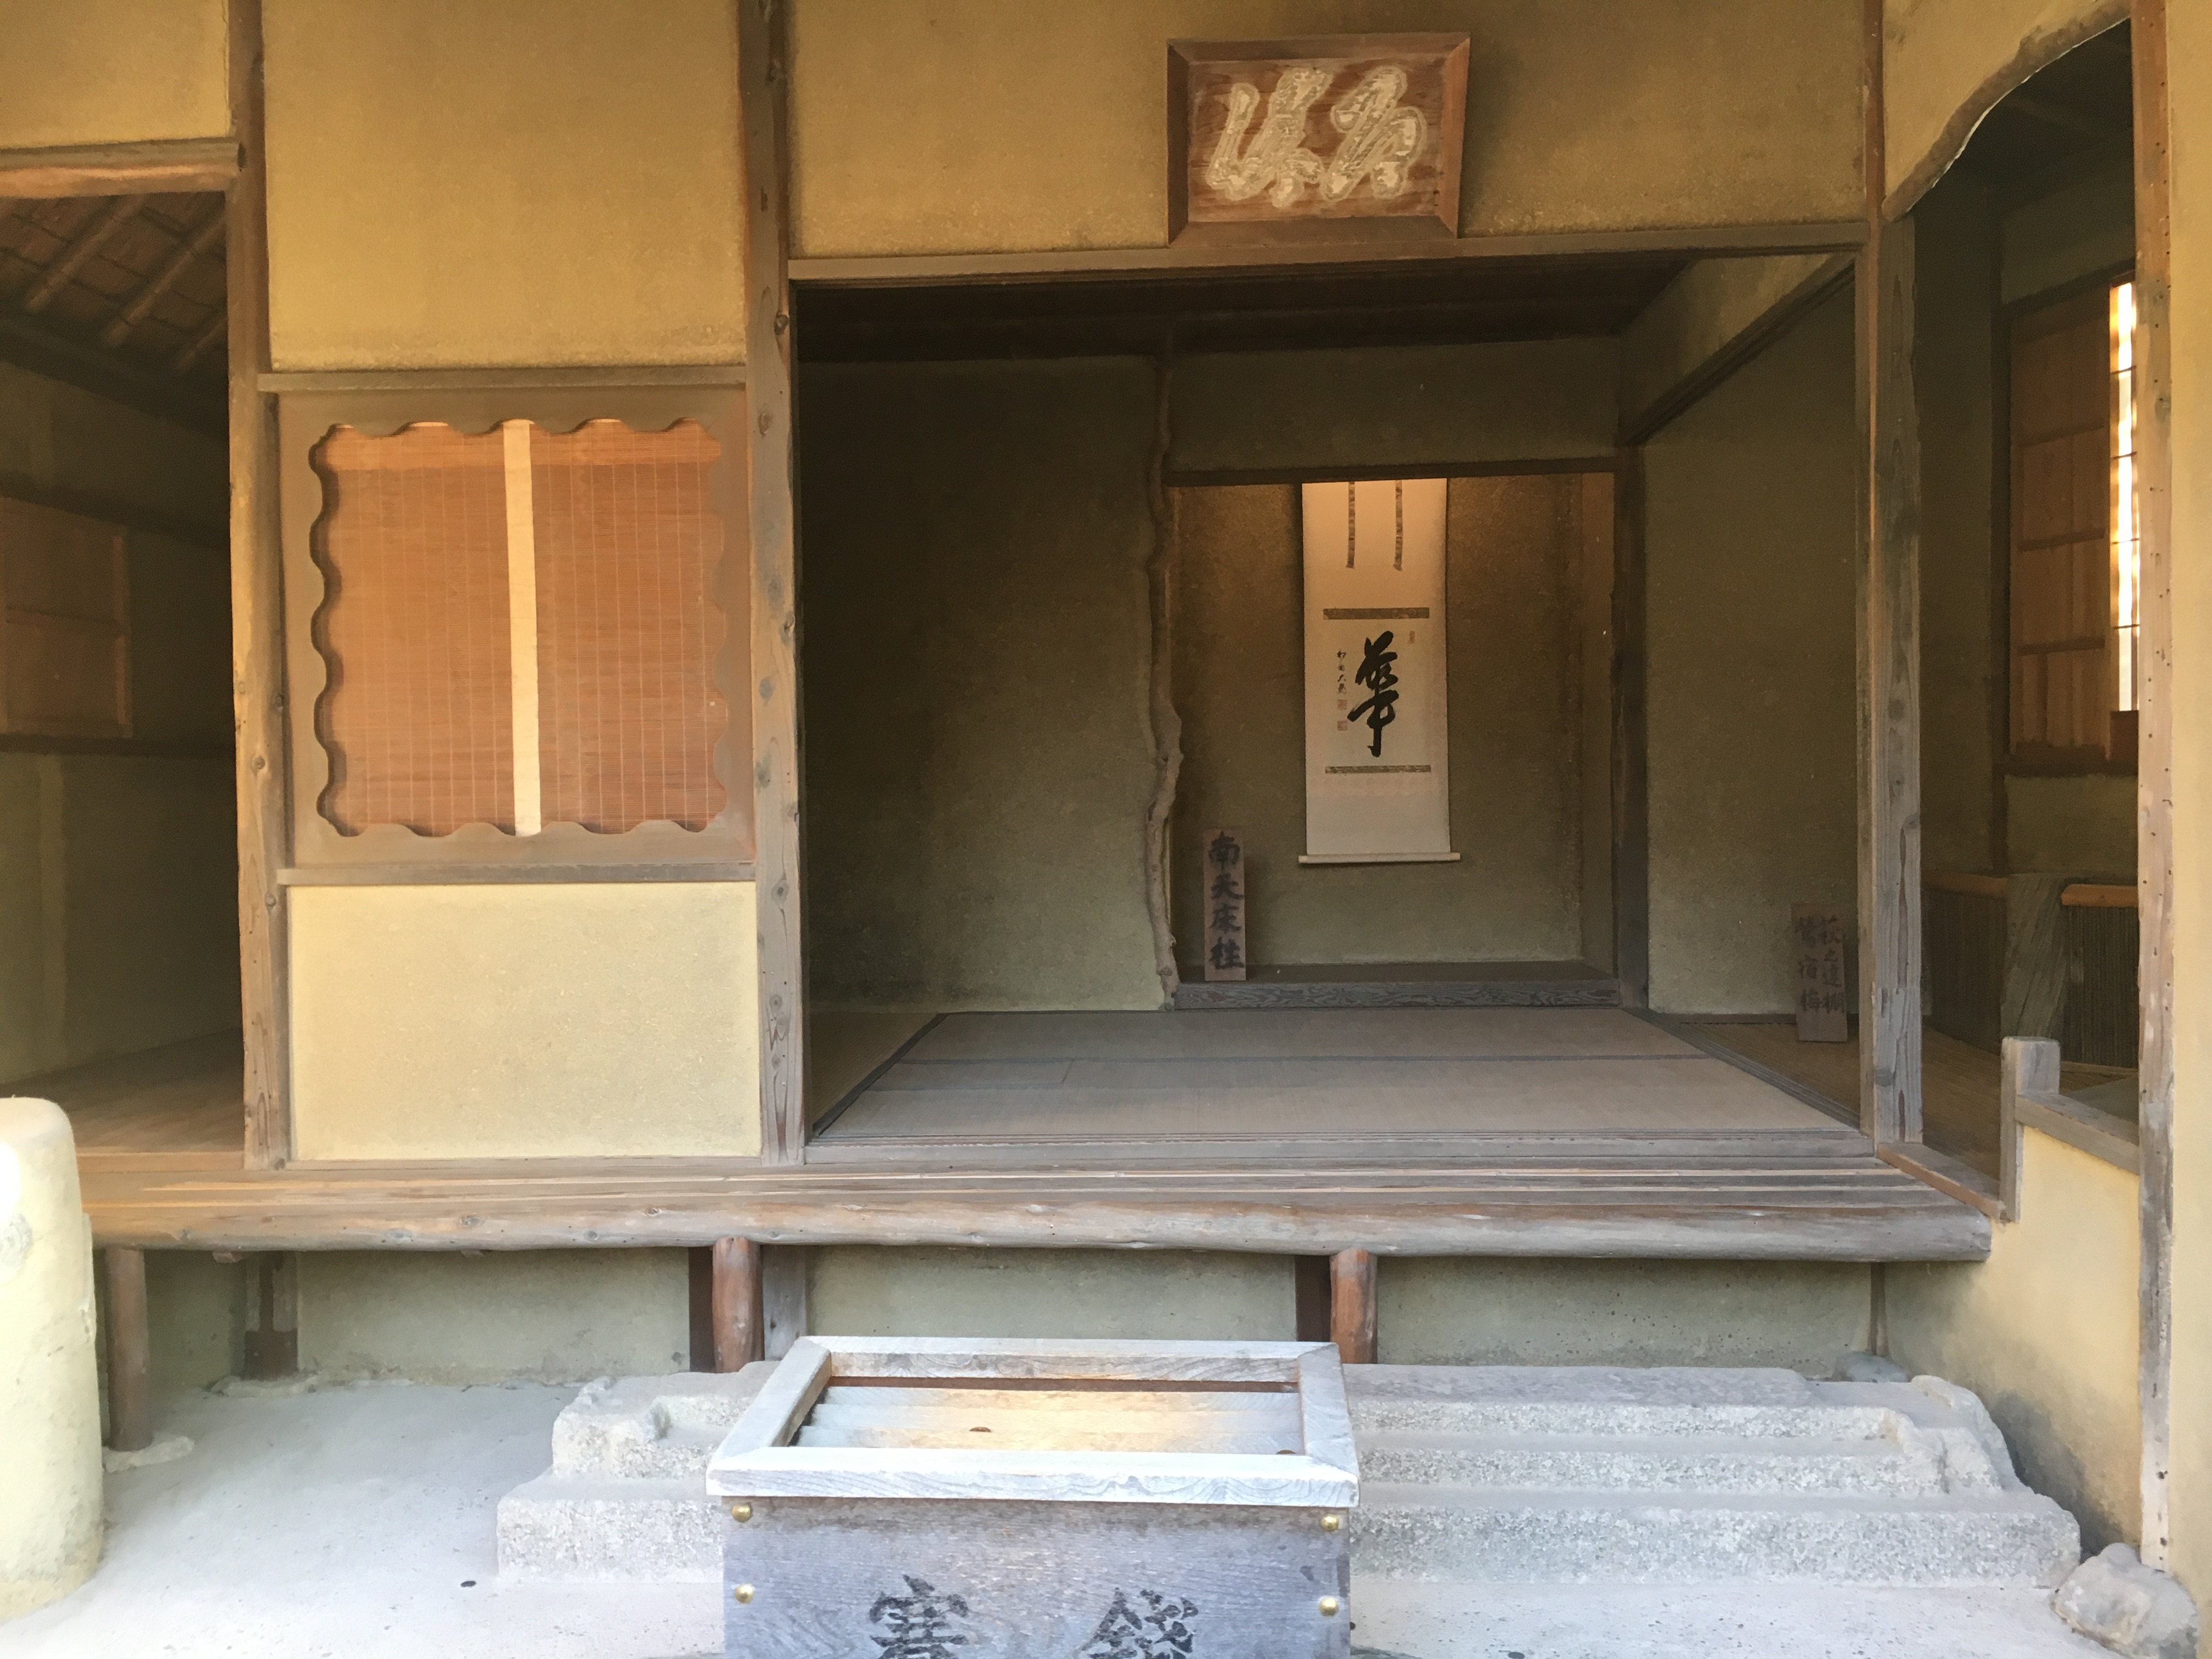 inside of Japanese tea house with floors made of a special wood